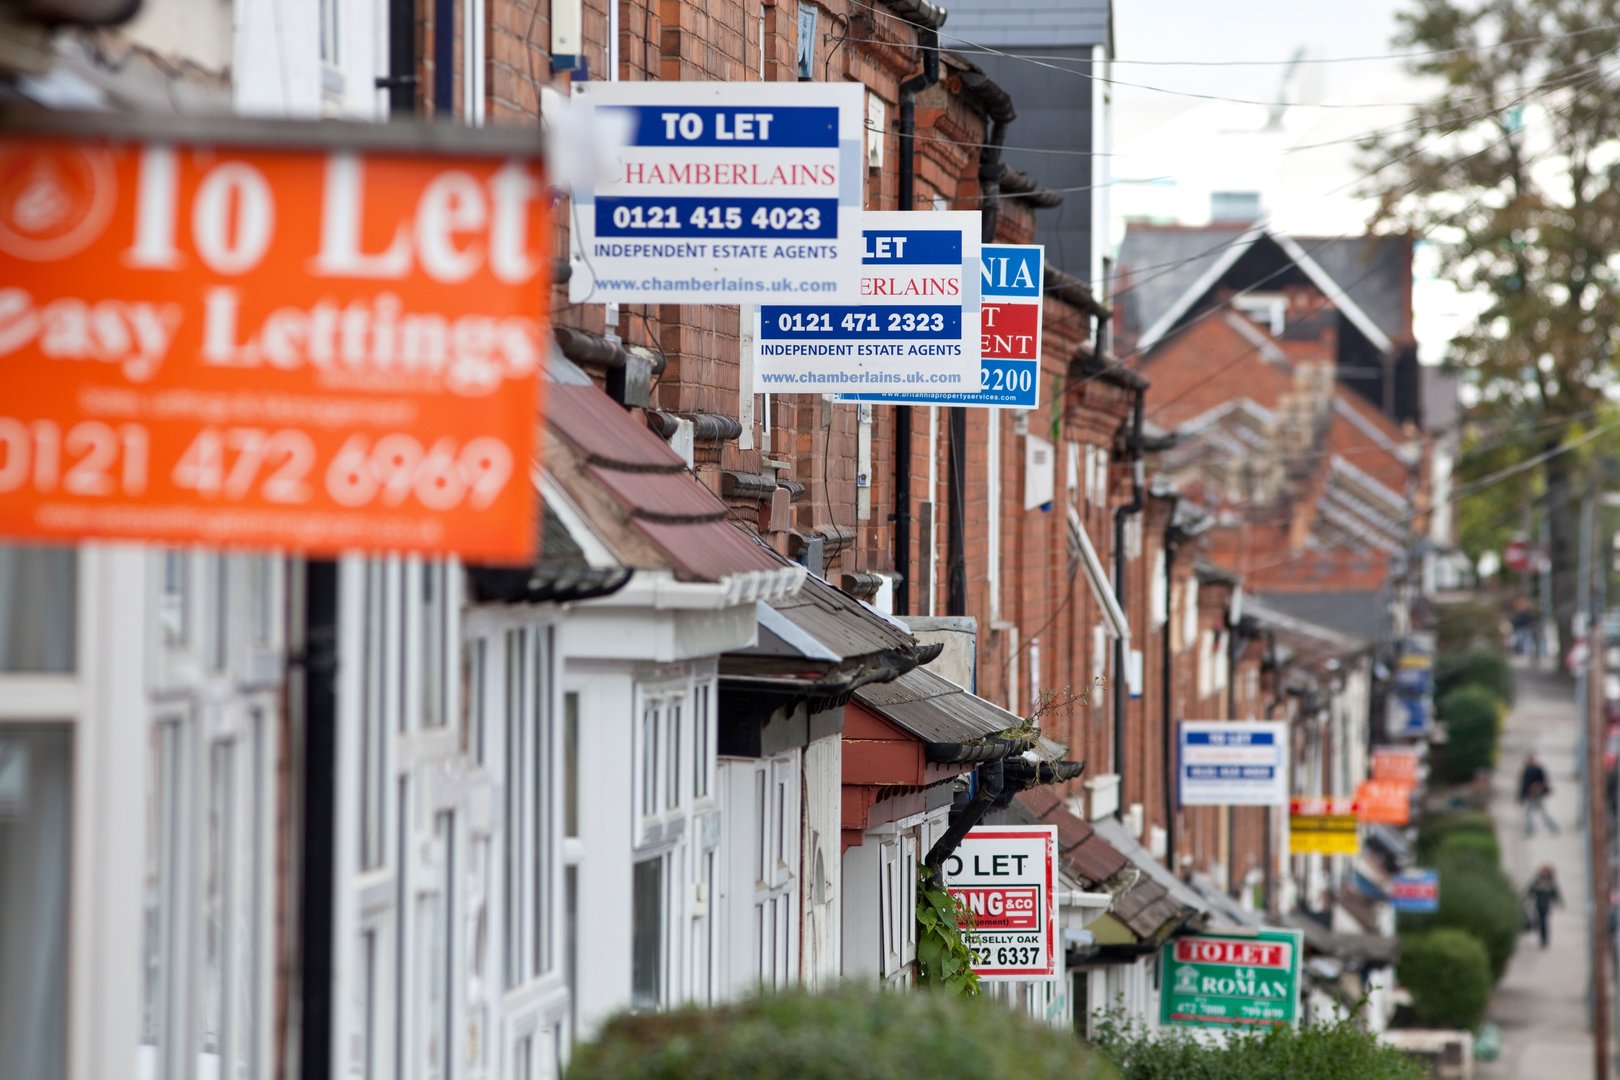 Renters will still face unfair evictions under 'inadequate' new bill, say campaigners